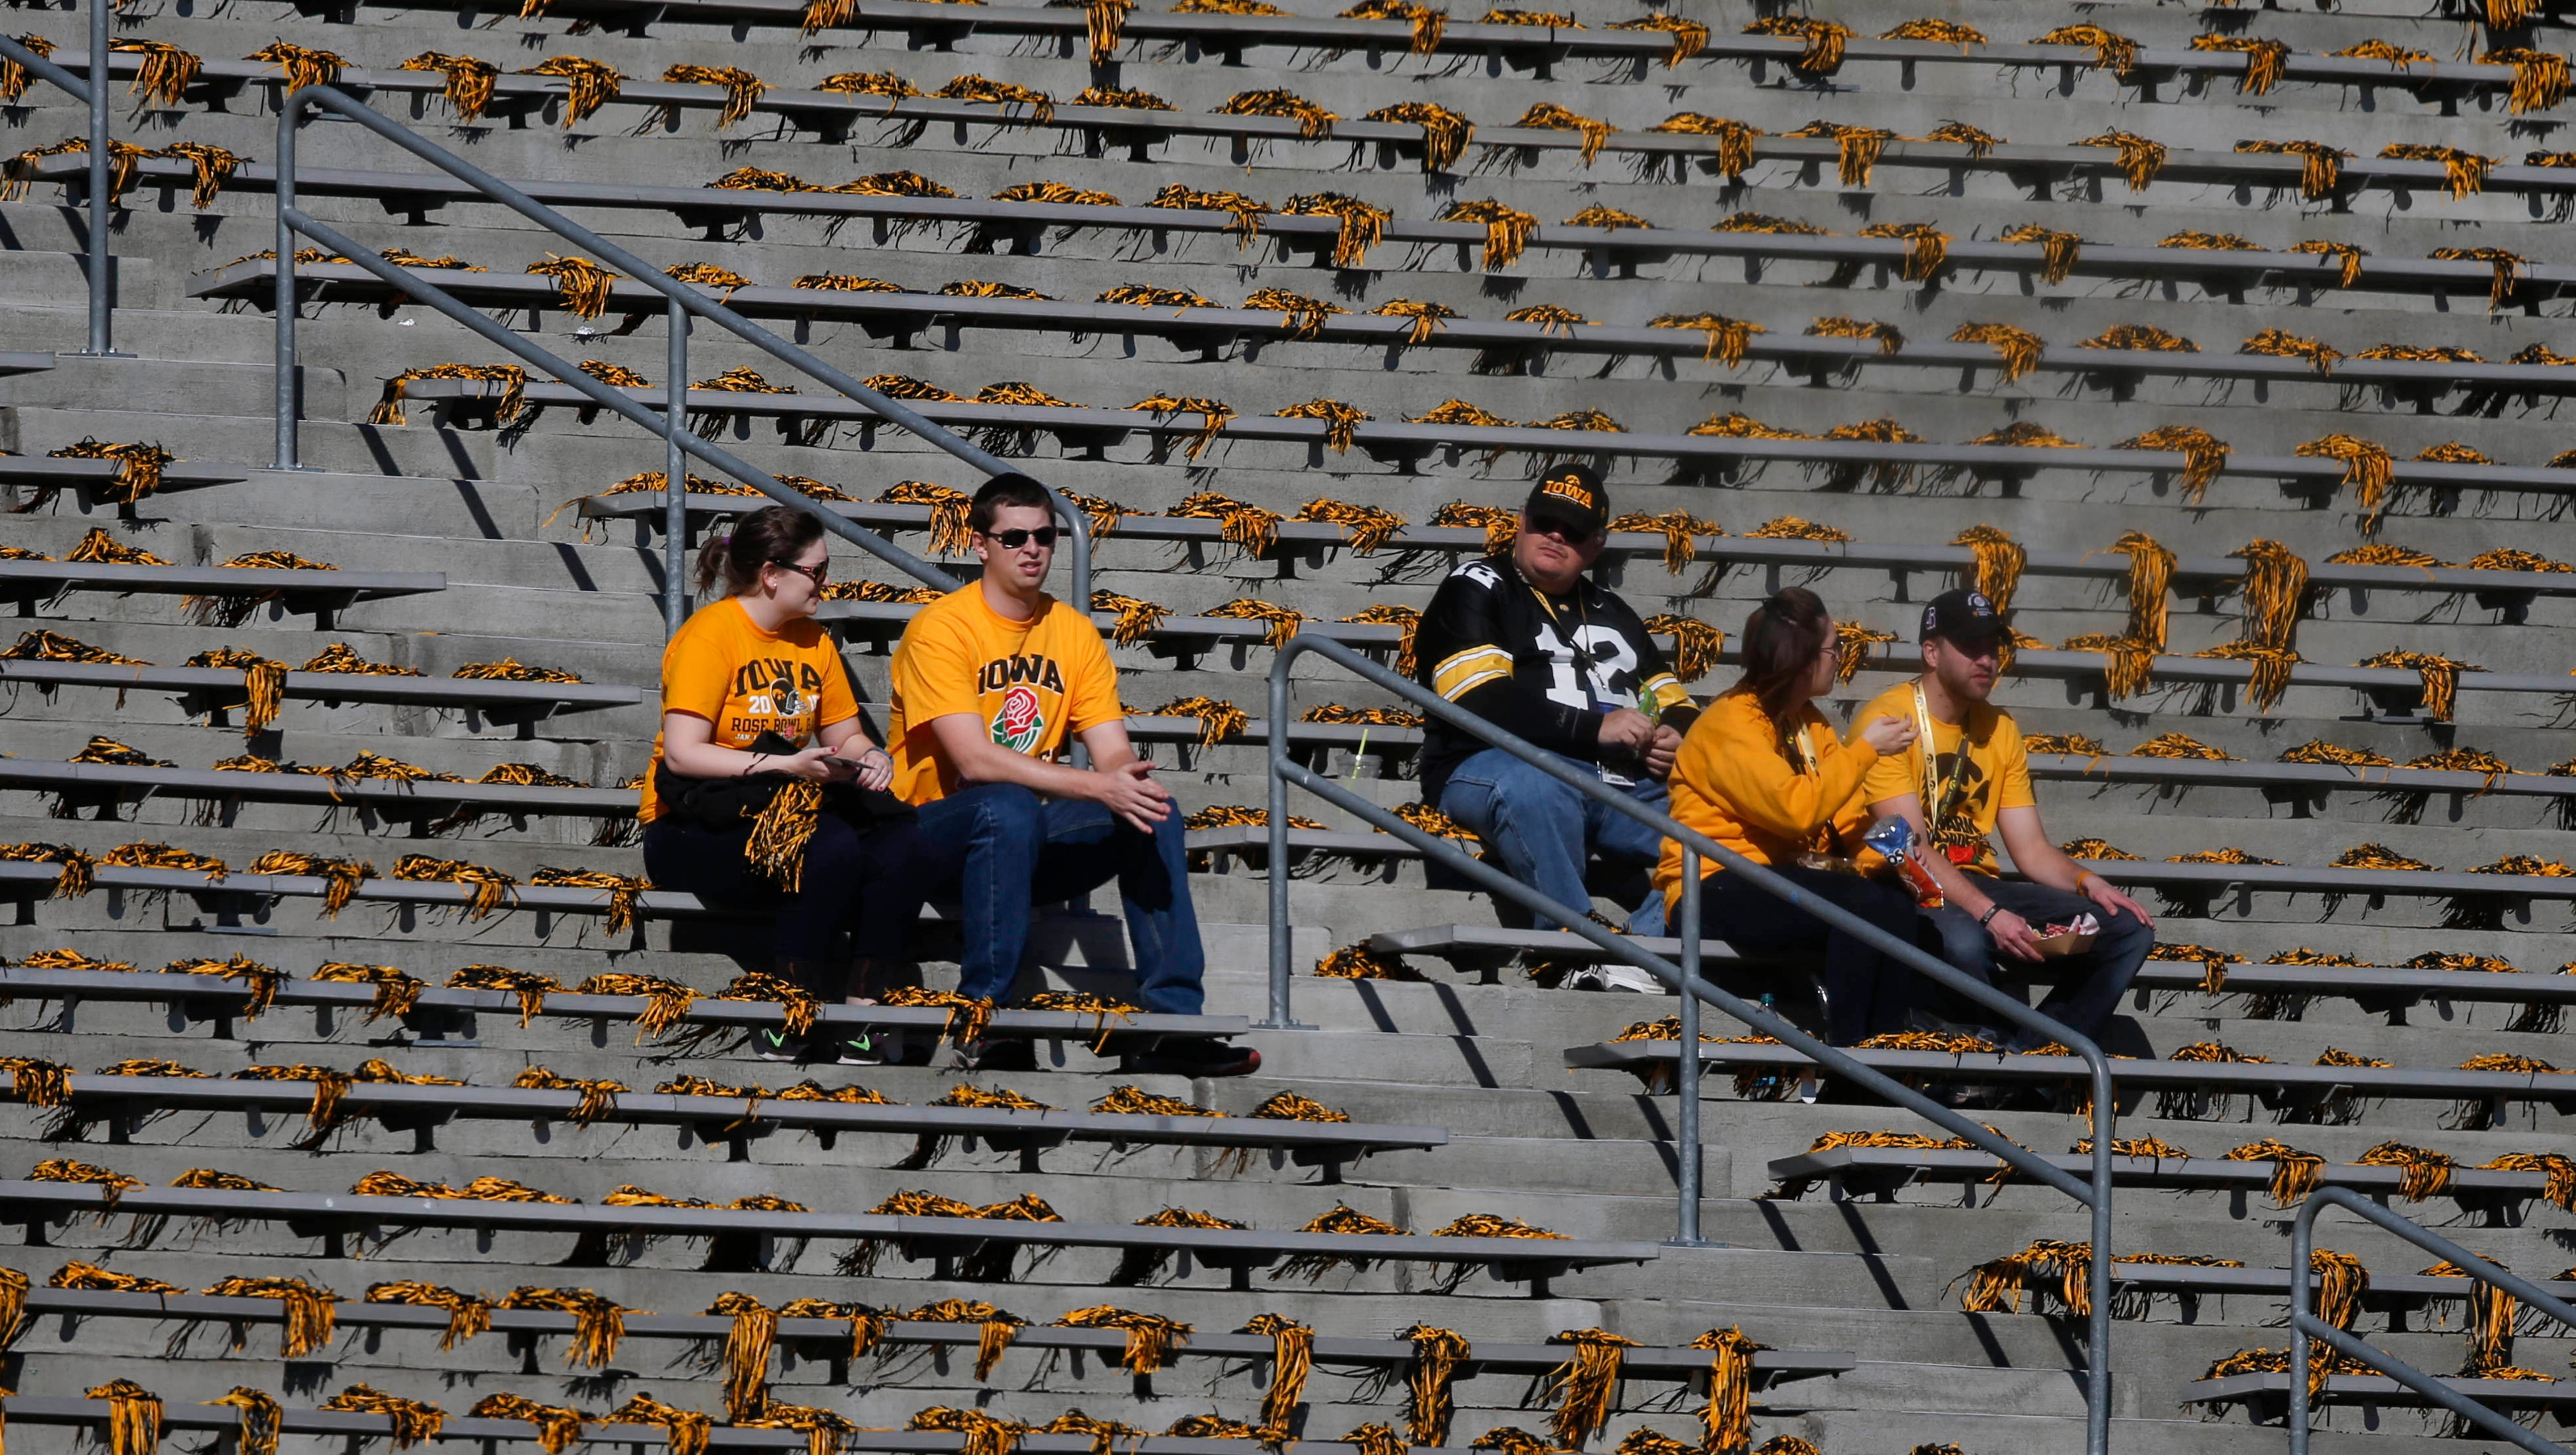 Iowa Hawkeye football fans are among the first to find their seats prior to kickoff against Stanford on Friday, Jan. 1, 2016, at the Rose Bowl in Pasadena, Calif.